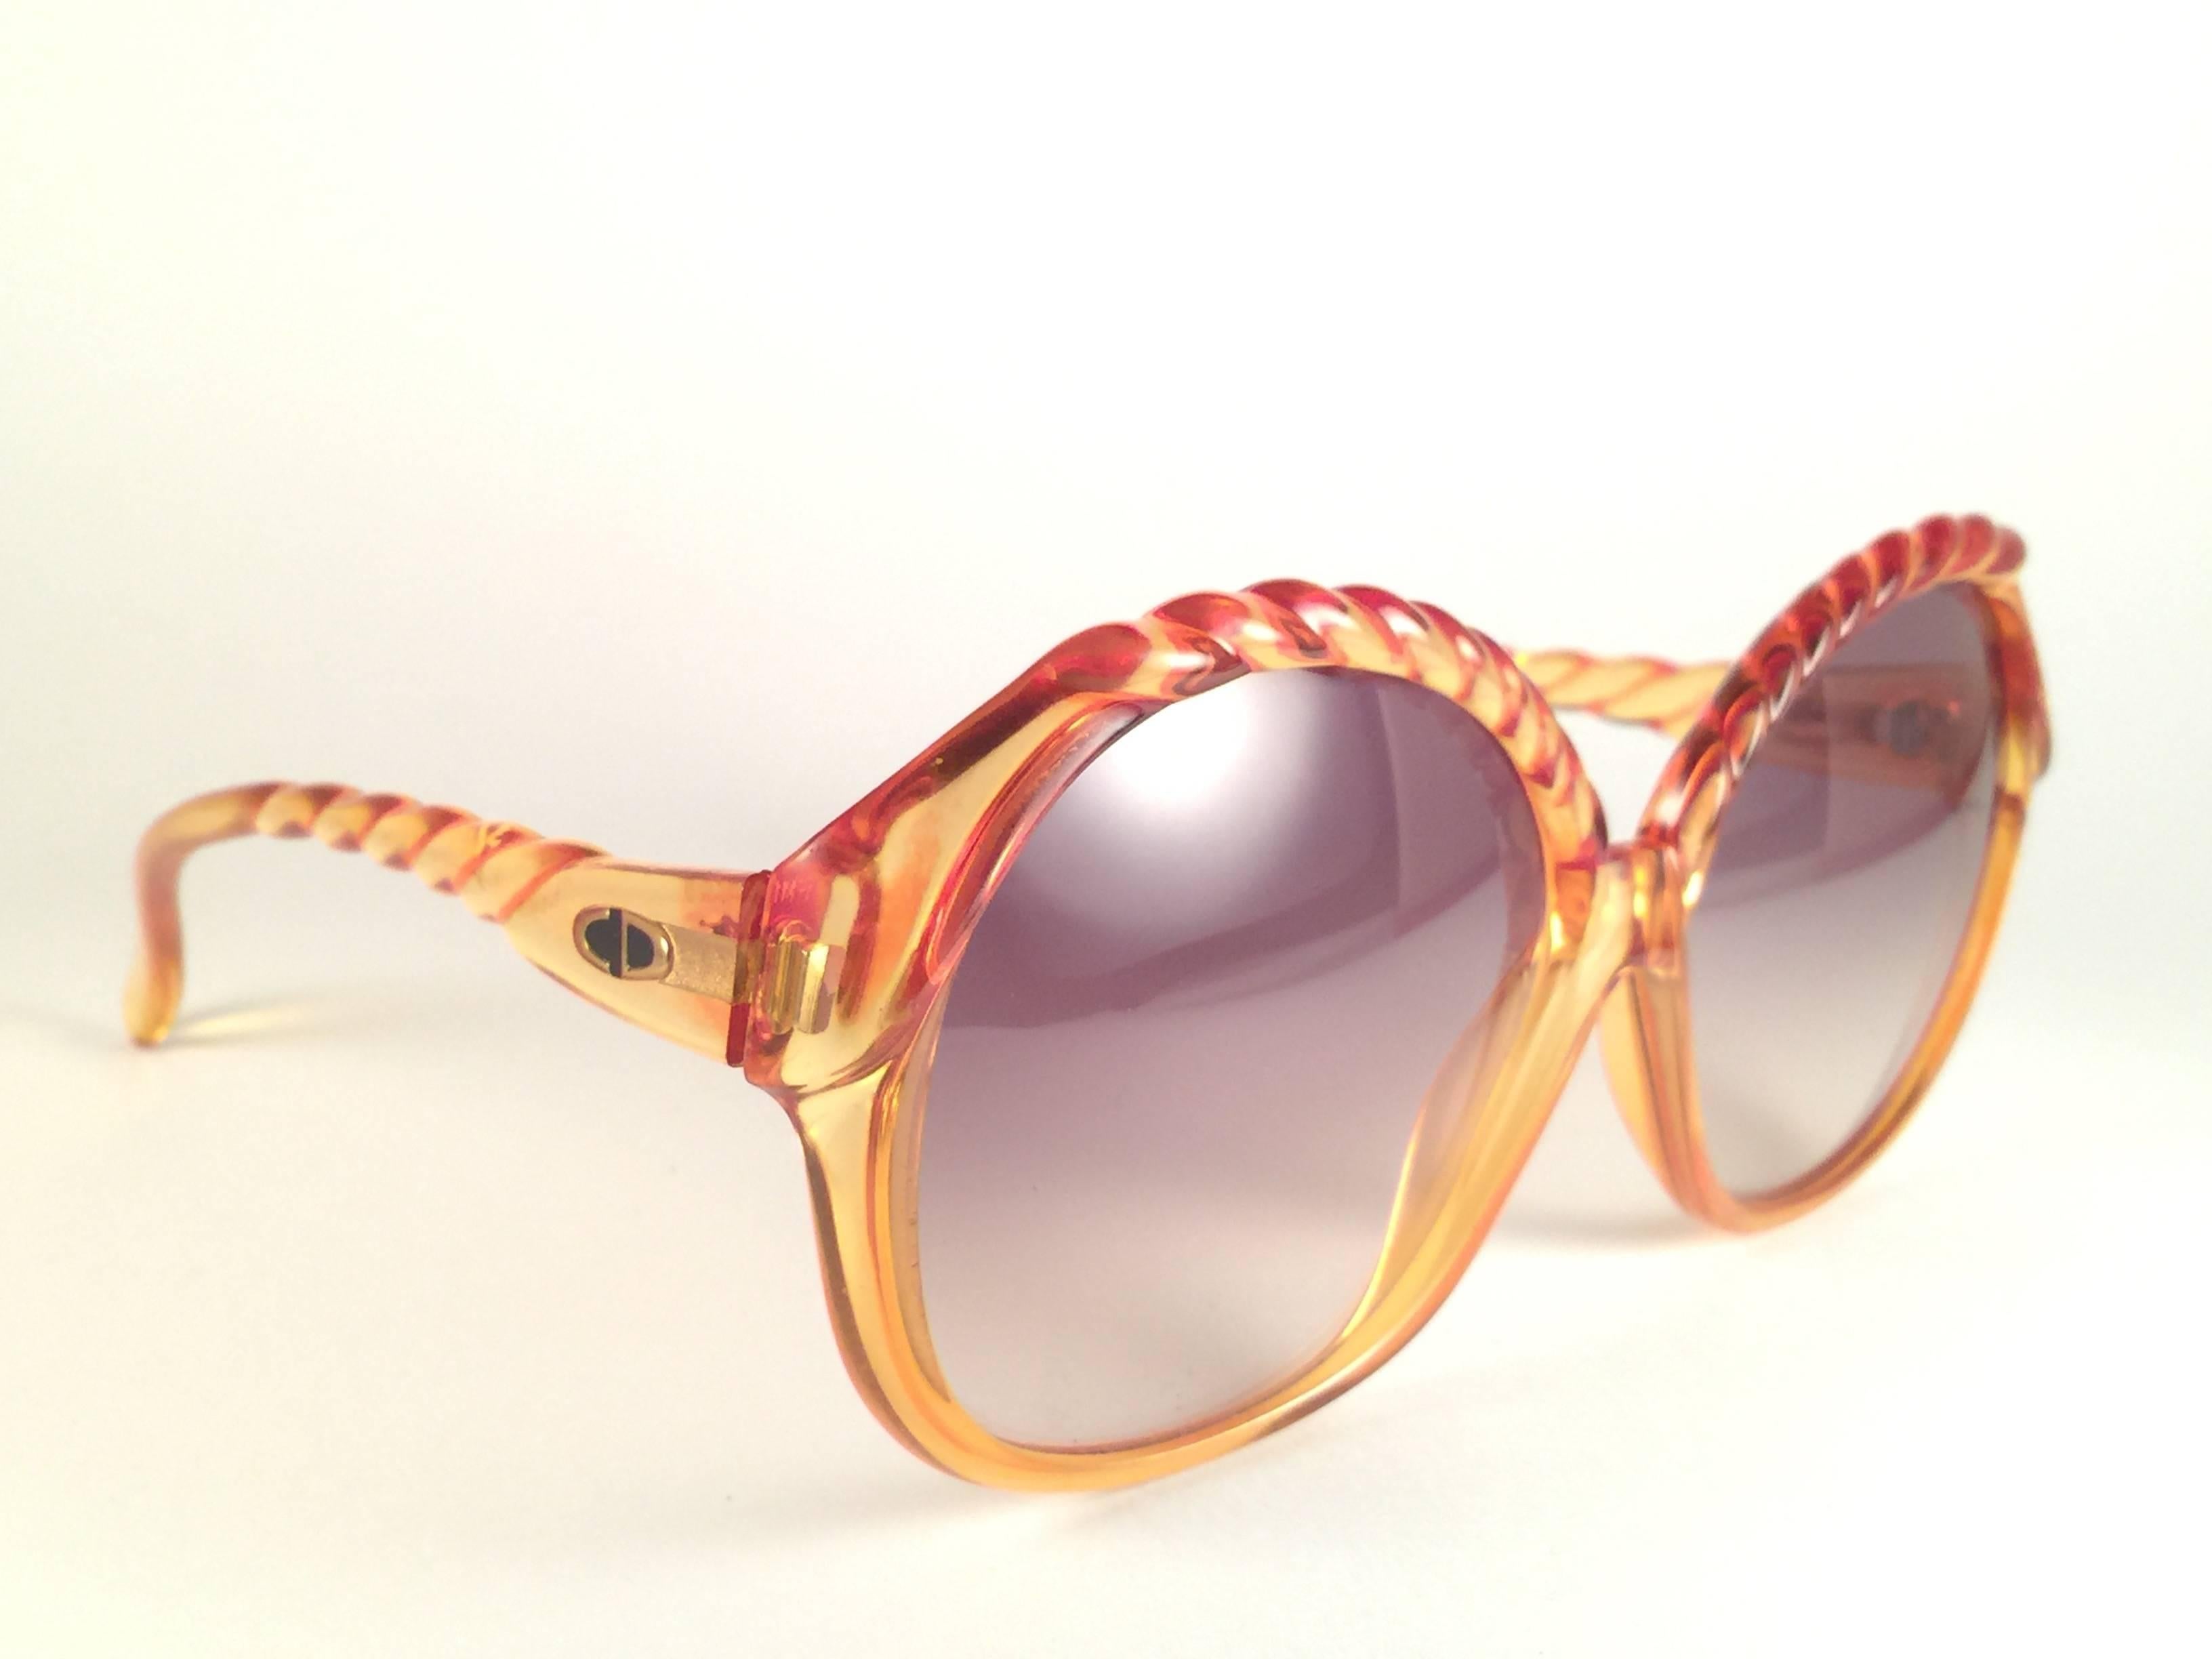 New Vintage Christian Dior 2063 30 Amber with braid accents frame with spotless light brown gradient lenses.   Made in Germany.  Produced and design in 1970's.  
New, never worn or displayed. 
Comes with its original silver Christian Dior Lunettes